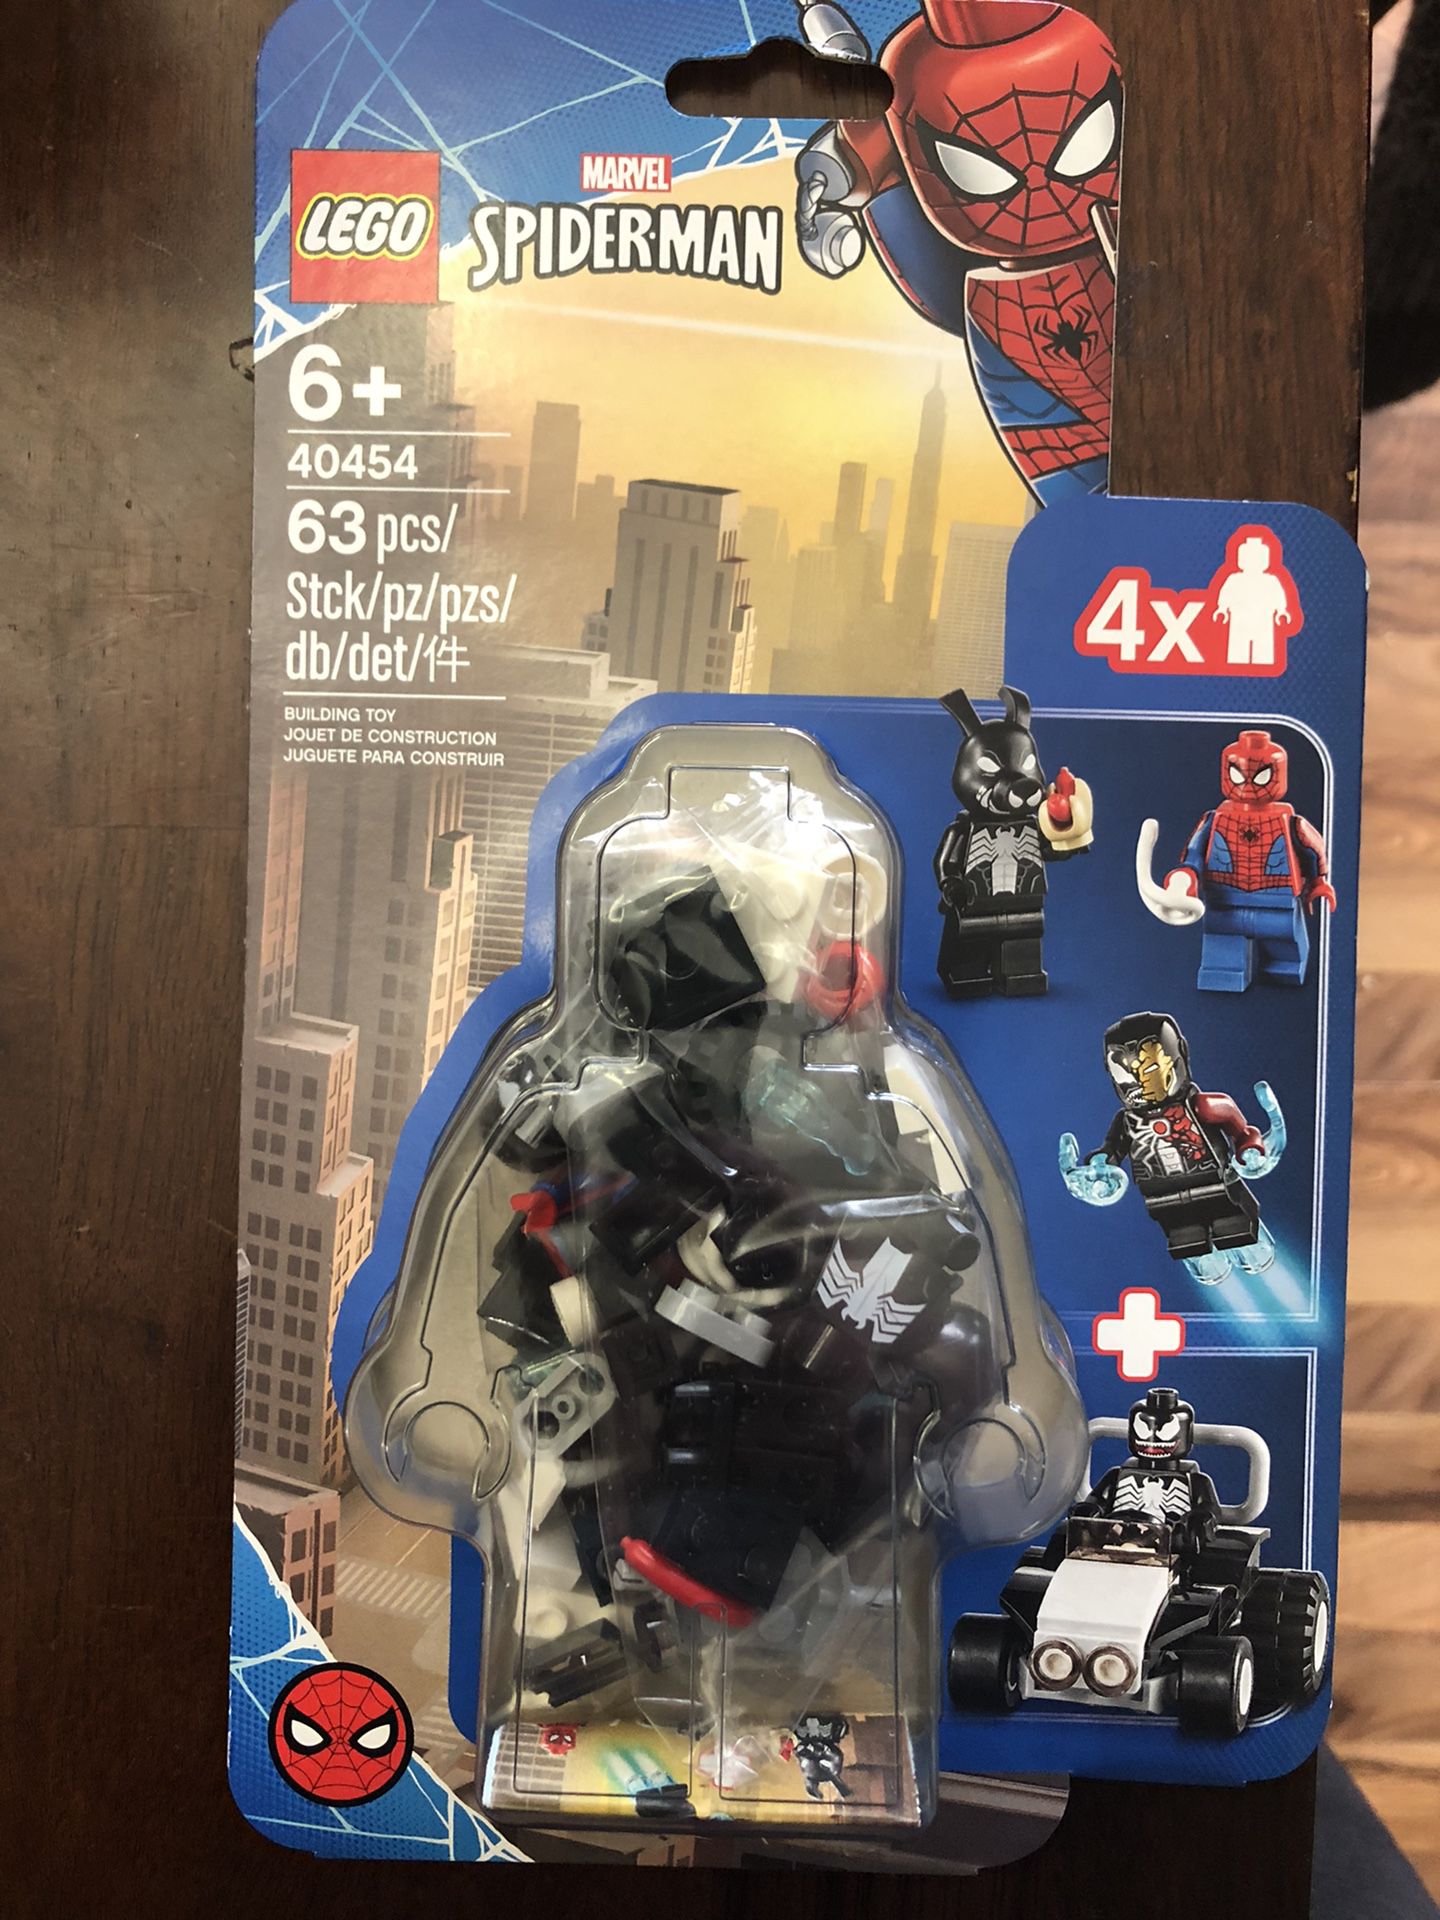 LEGO Spider-Man/Venom Minifigure Blister Pack for in Palatine, IL - OfferUp